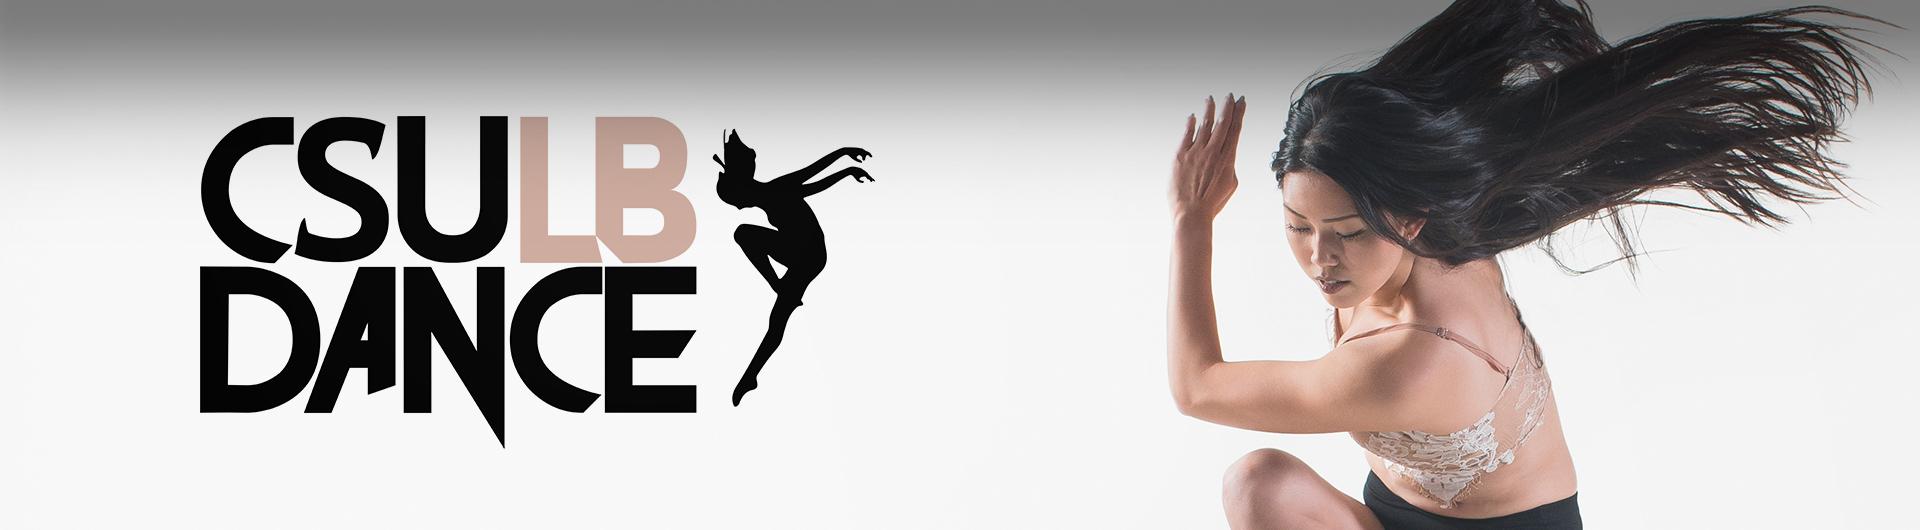 CSULB Dance Logo with dancer jumping